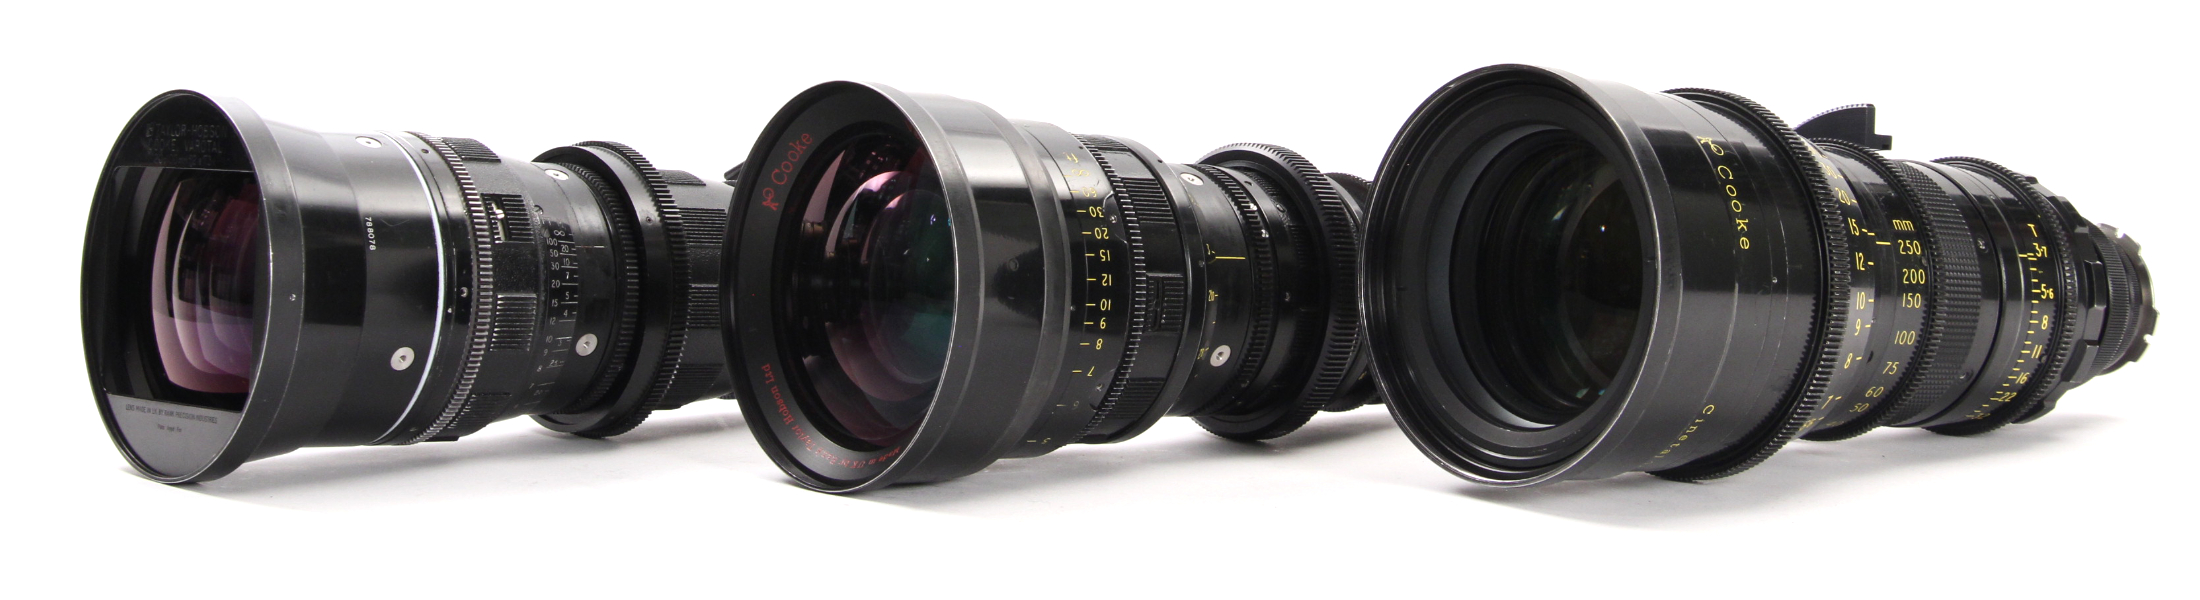 Cooke classic zooms